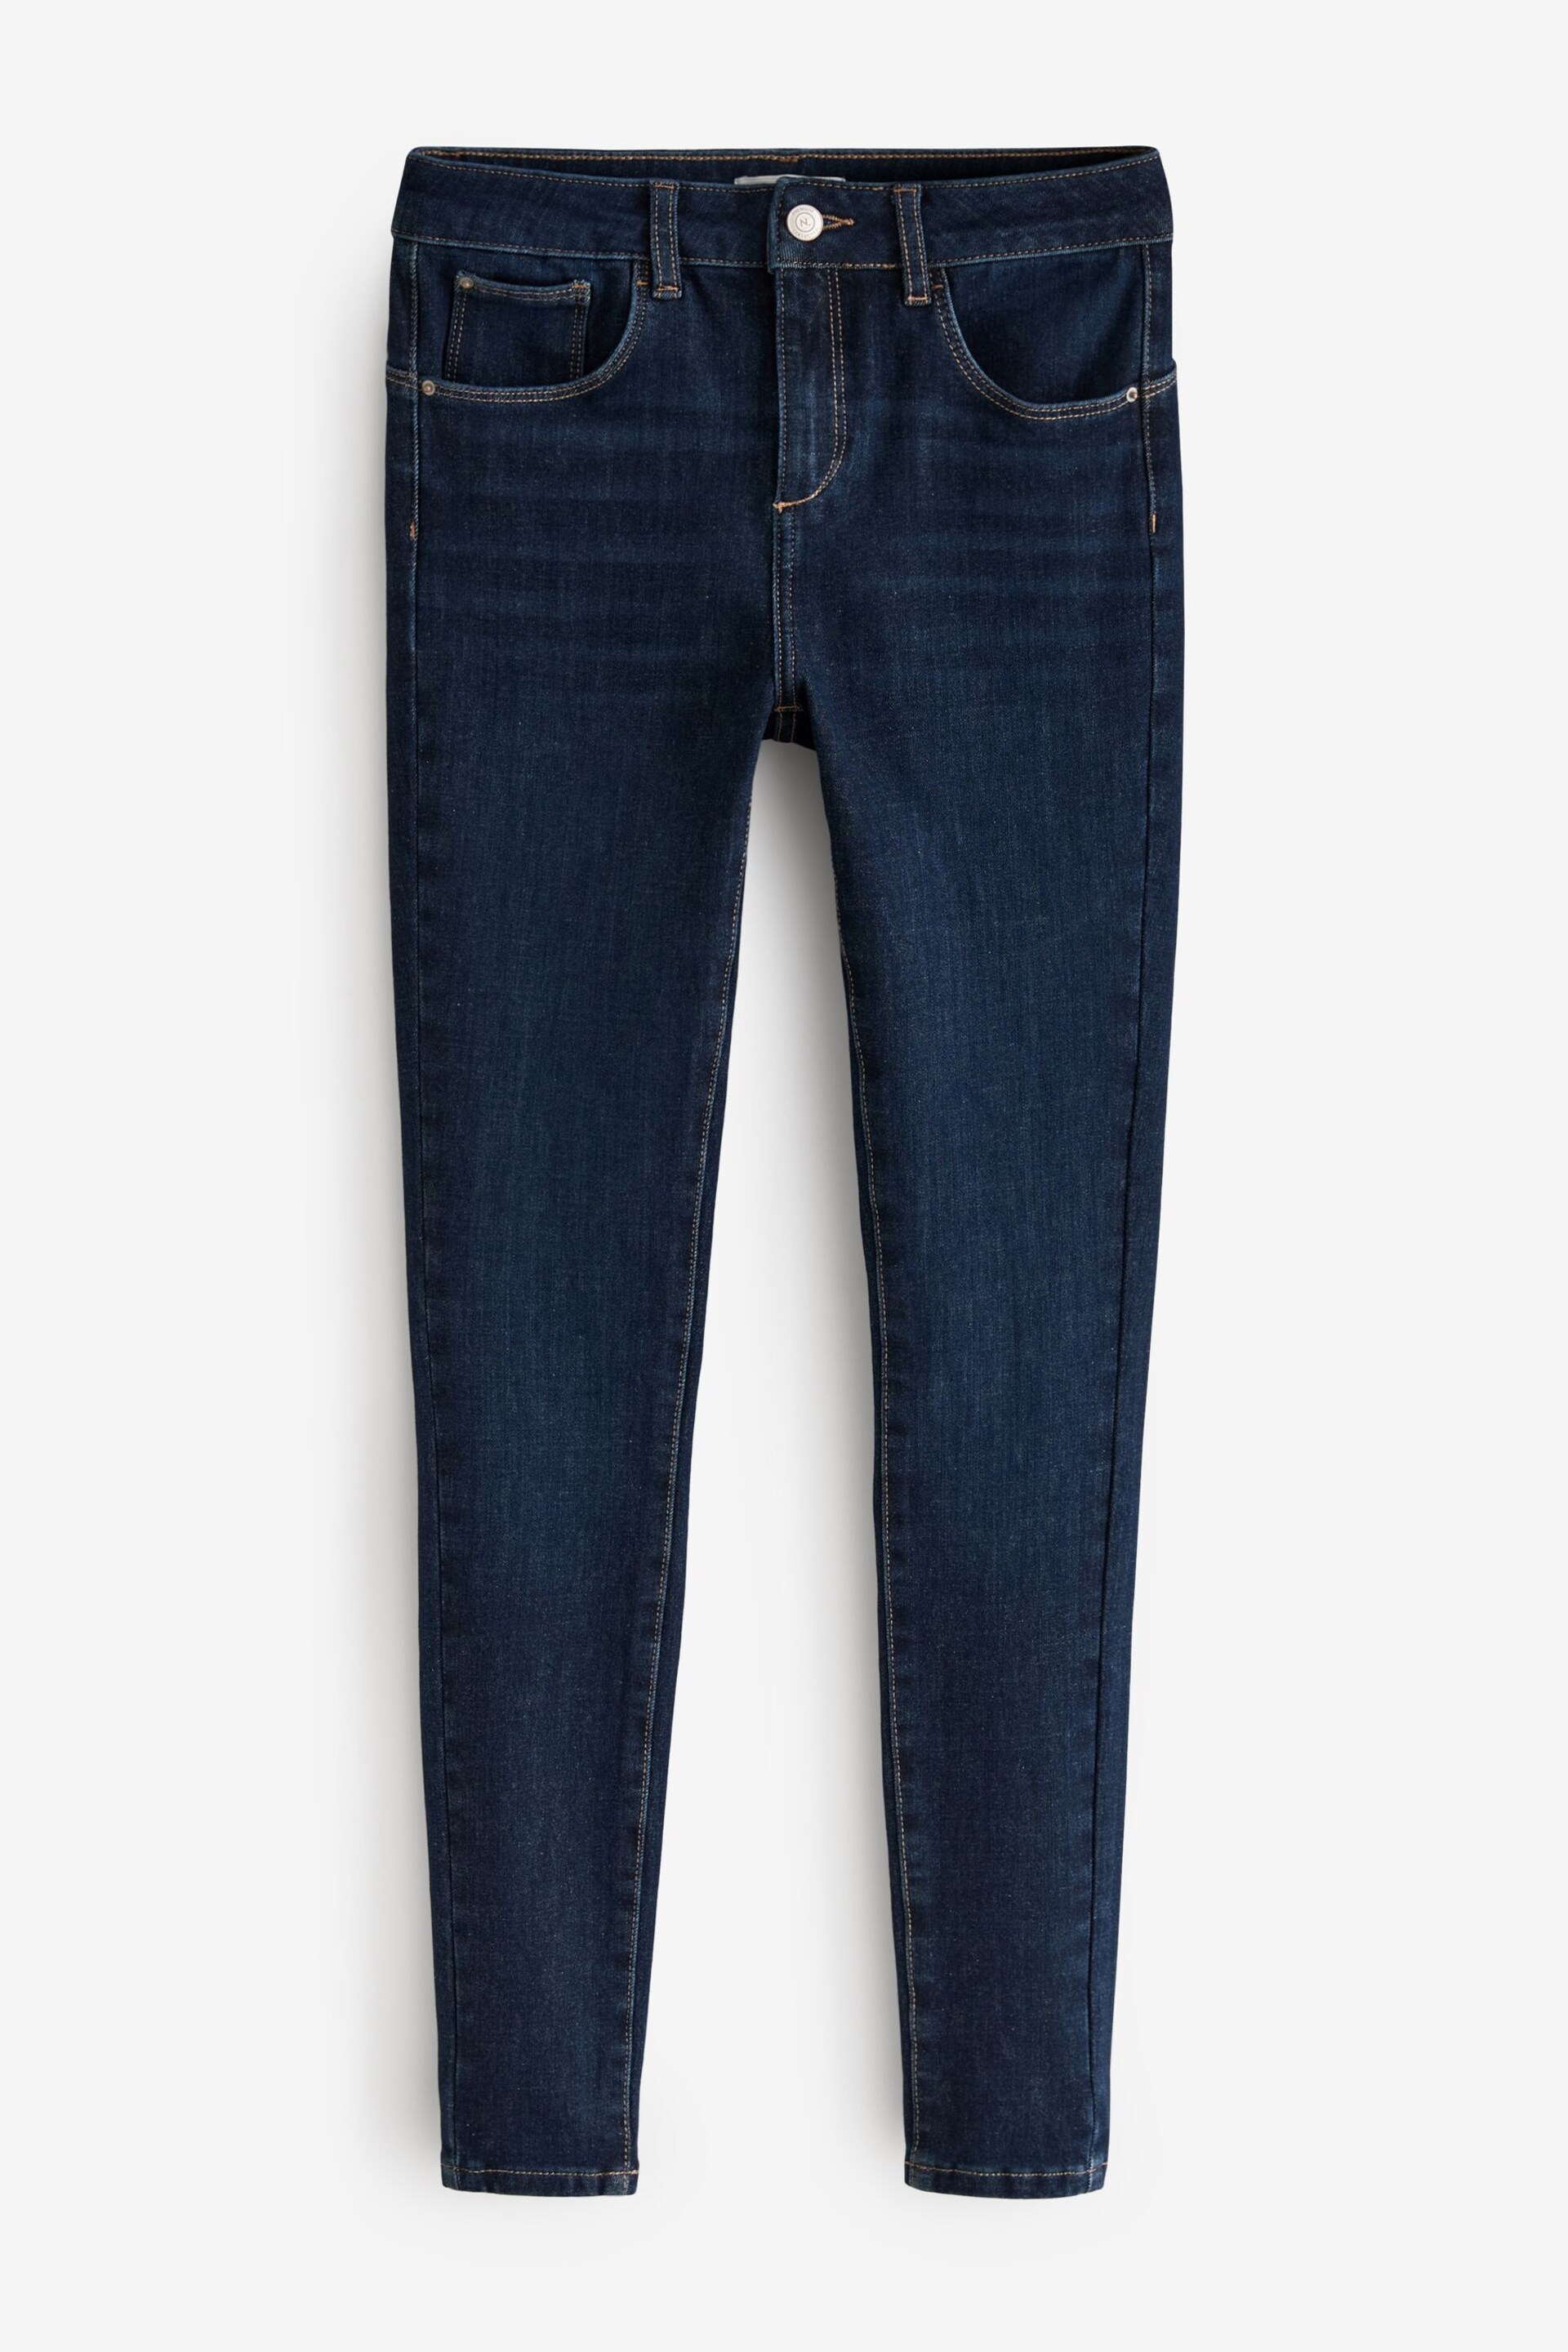 Rinse Blue Skinny 360° Stretch Jeans - Image 6 of 7